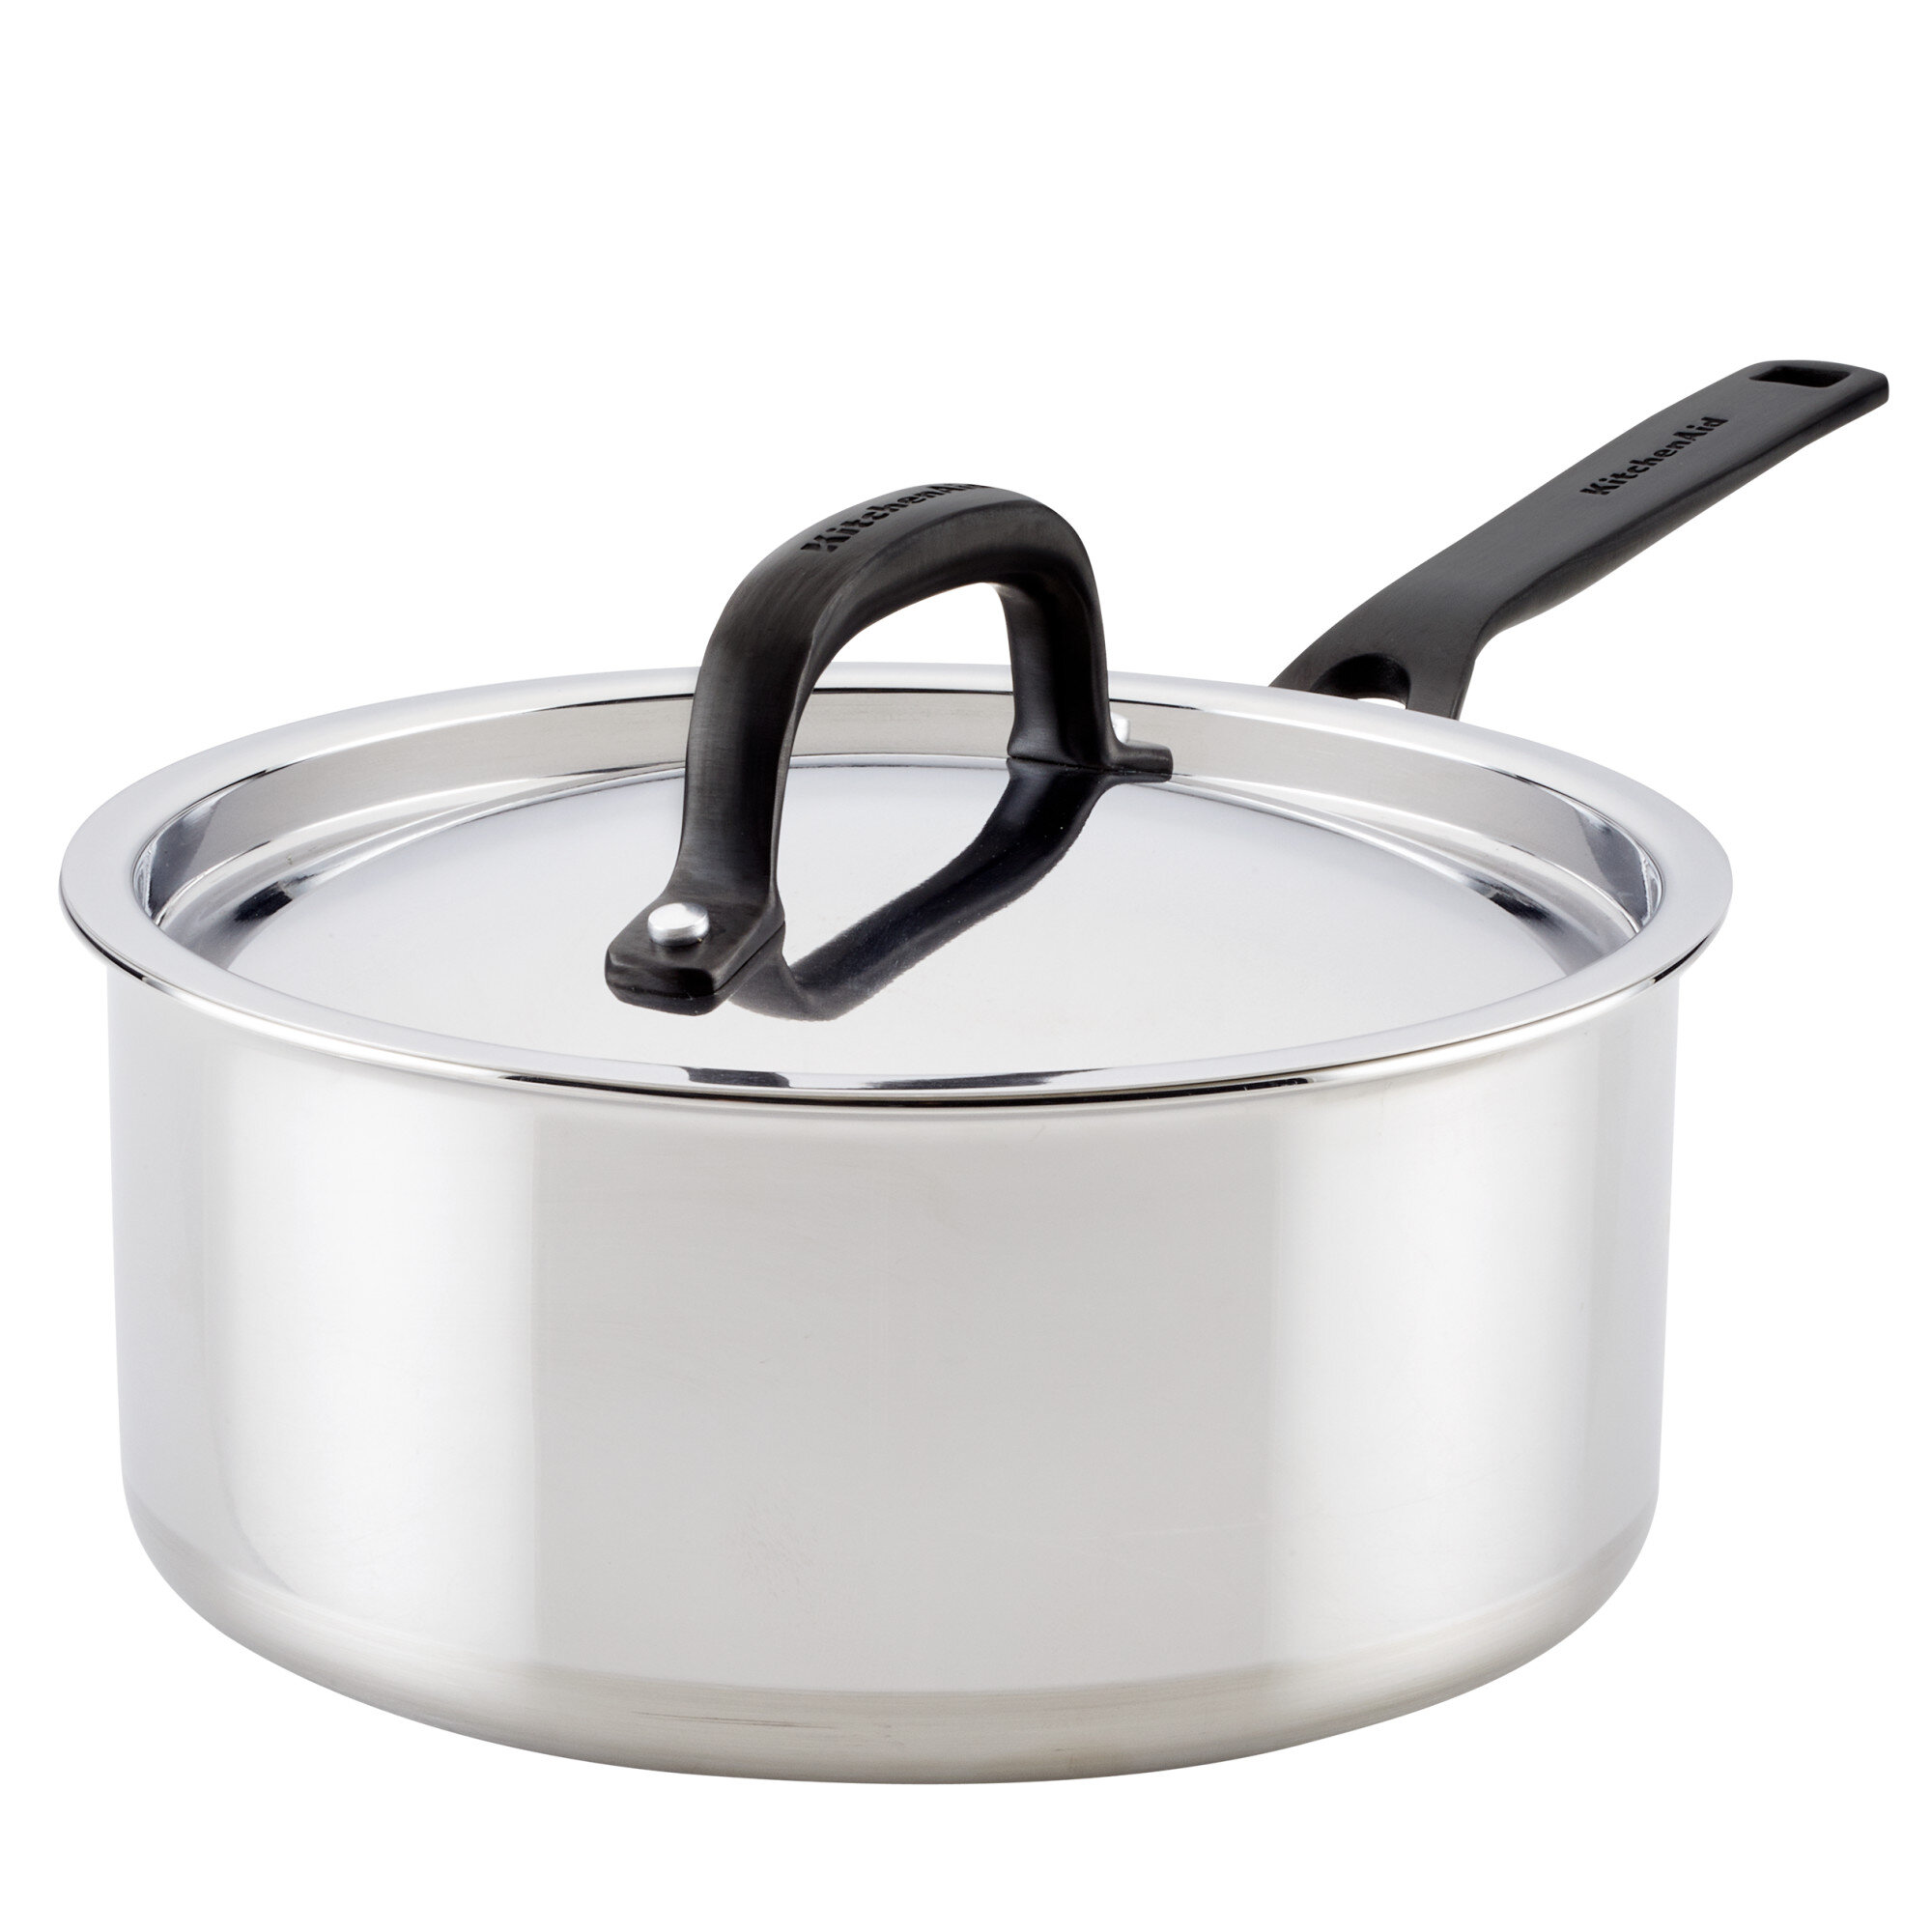 Kitchenaid 5-ply Clad Stainless Steel Saucepan With Lid, 3-quart